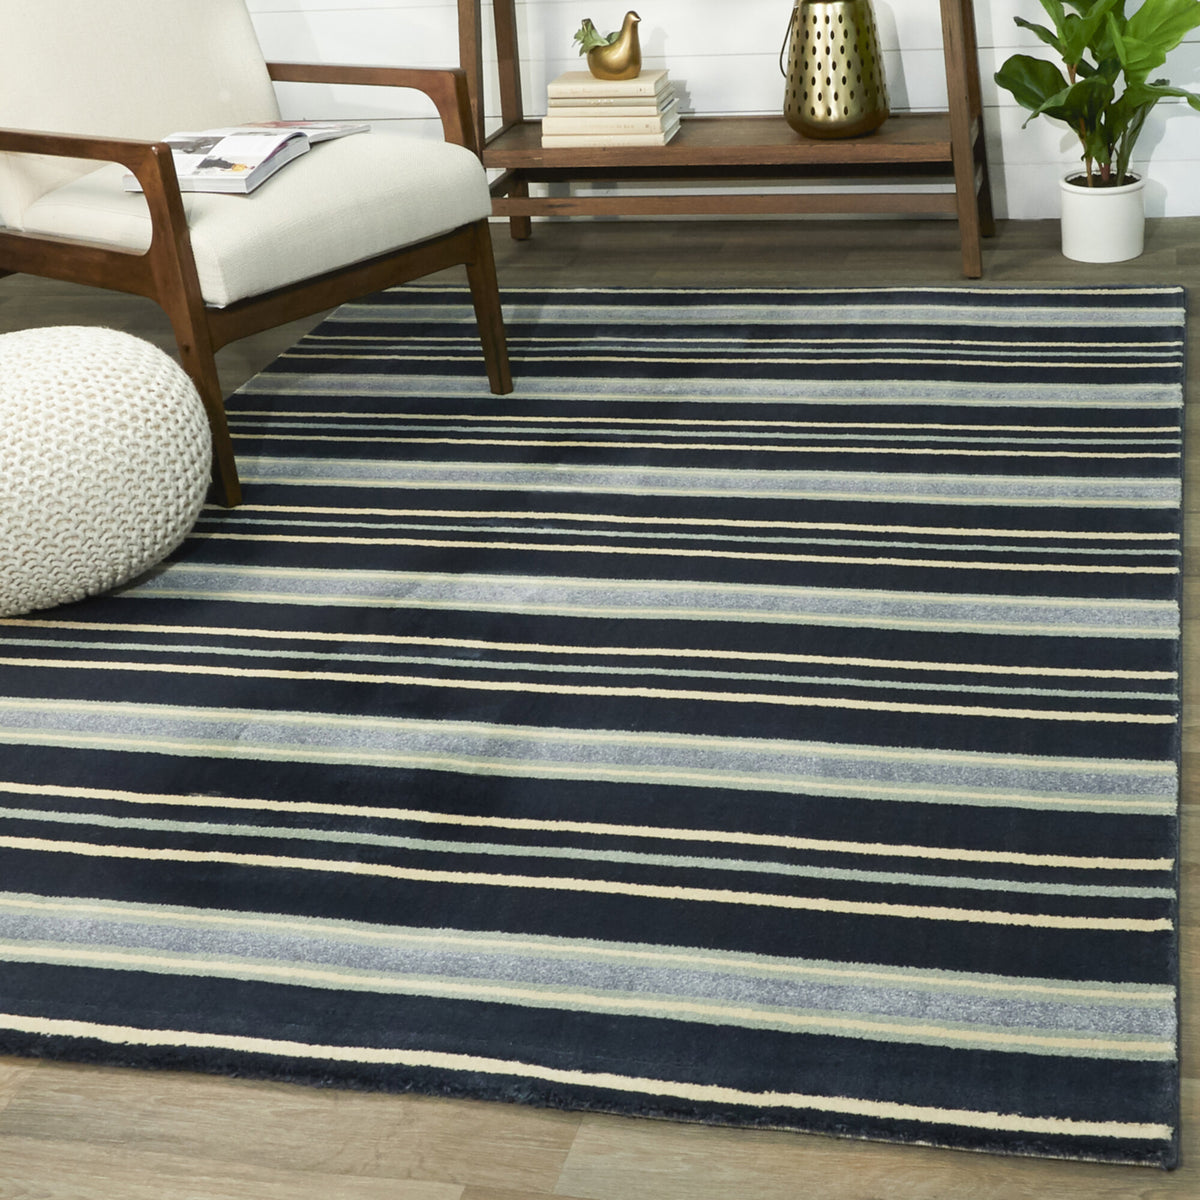 Lewis Striped Area Rug